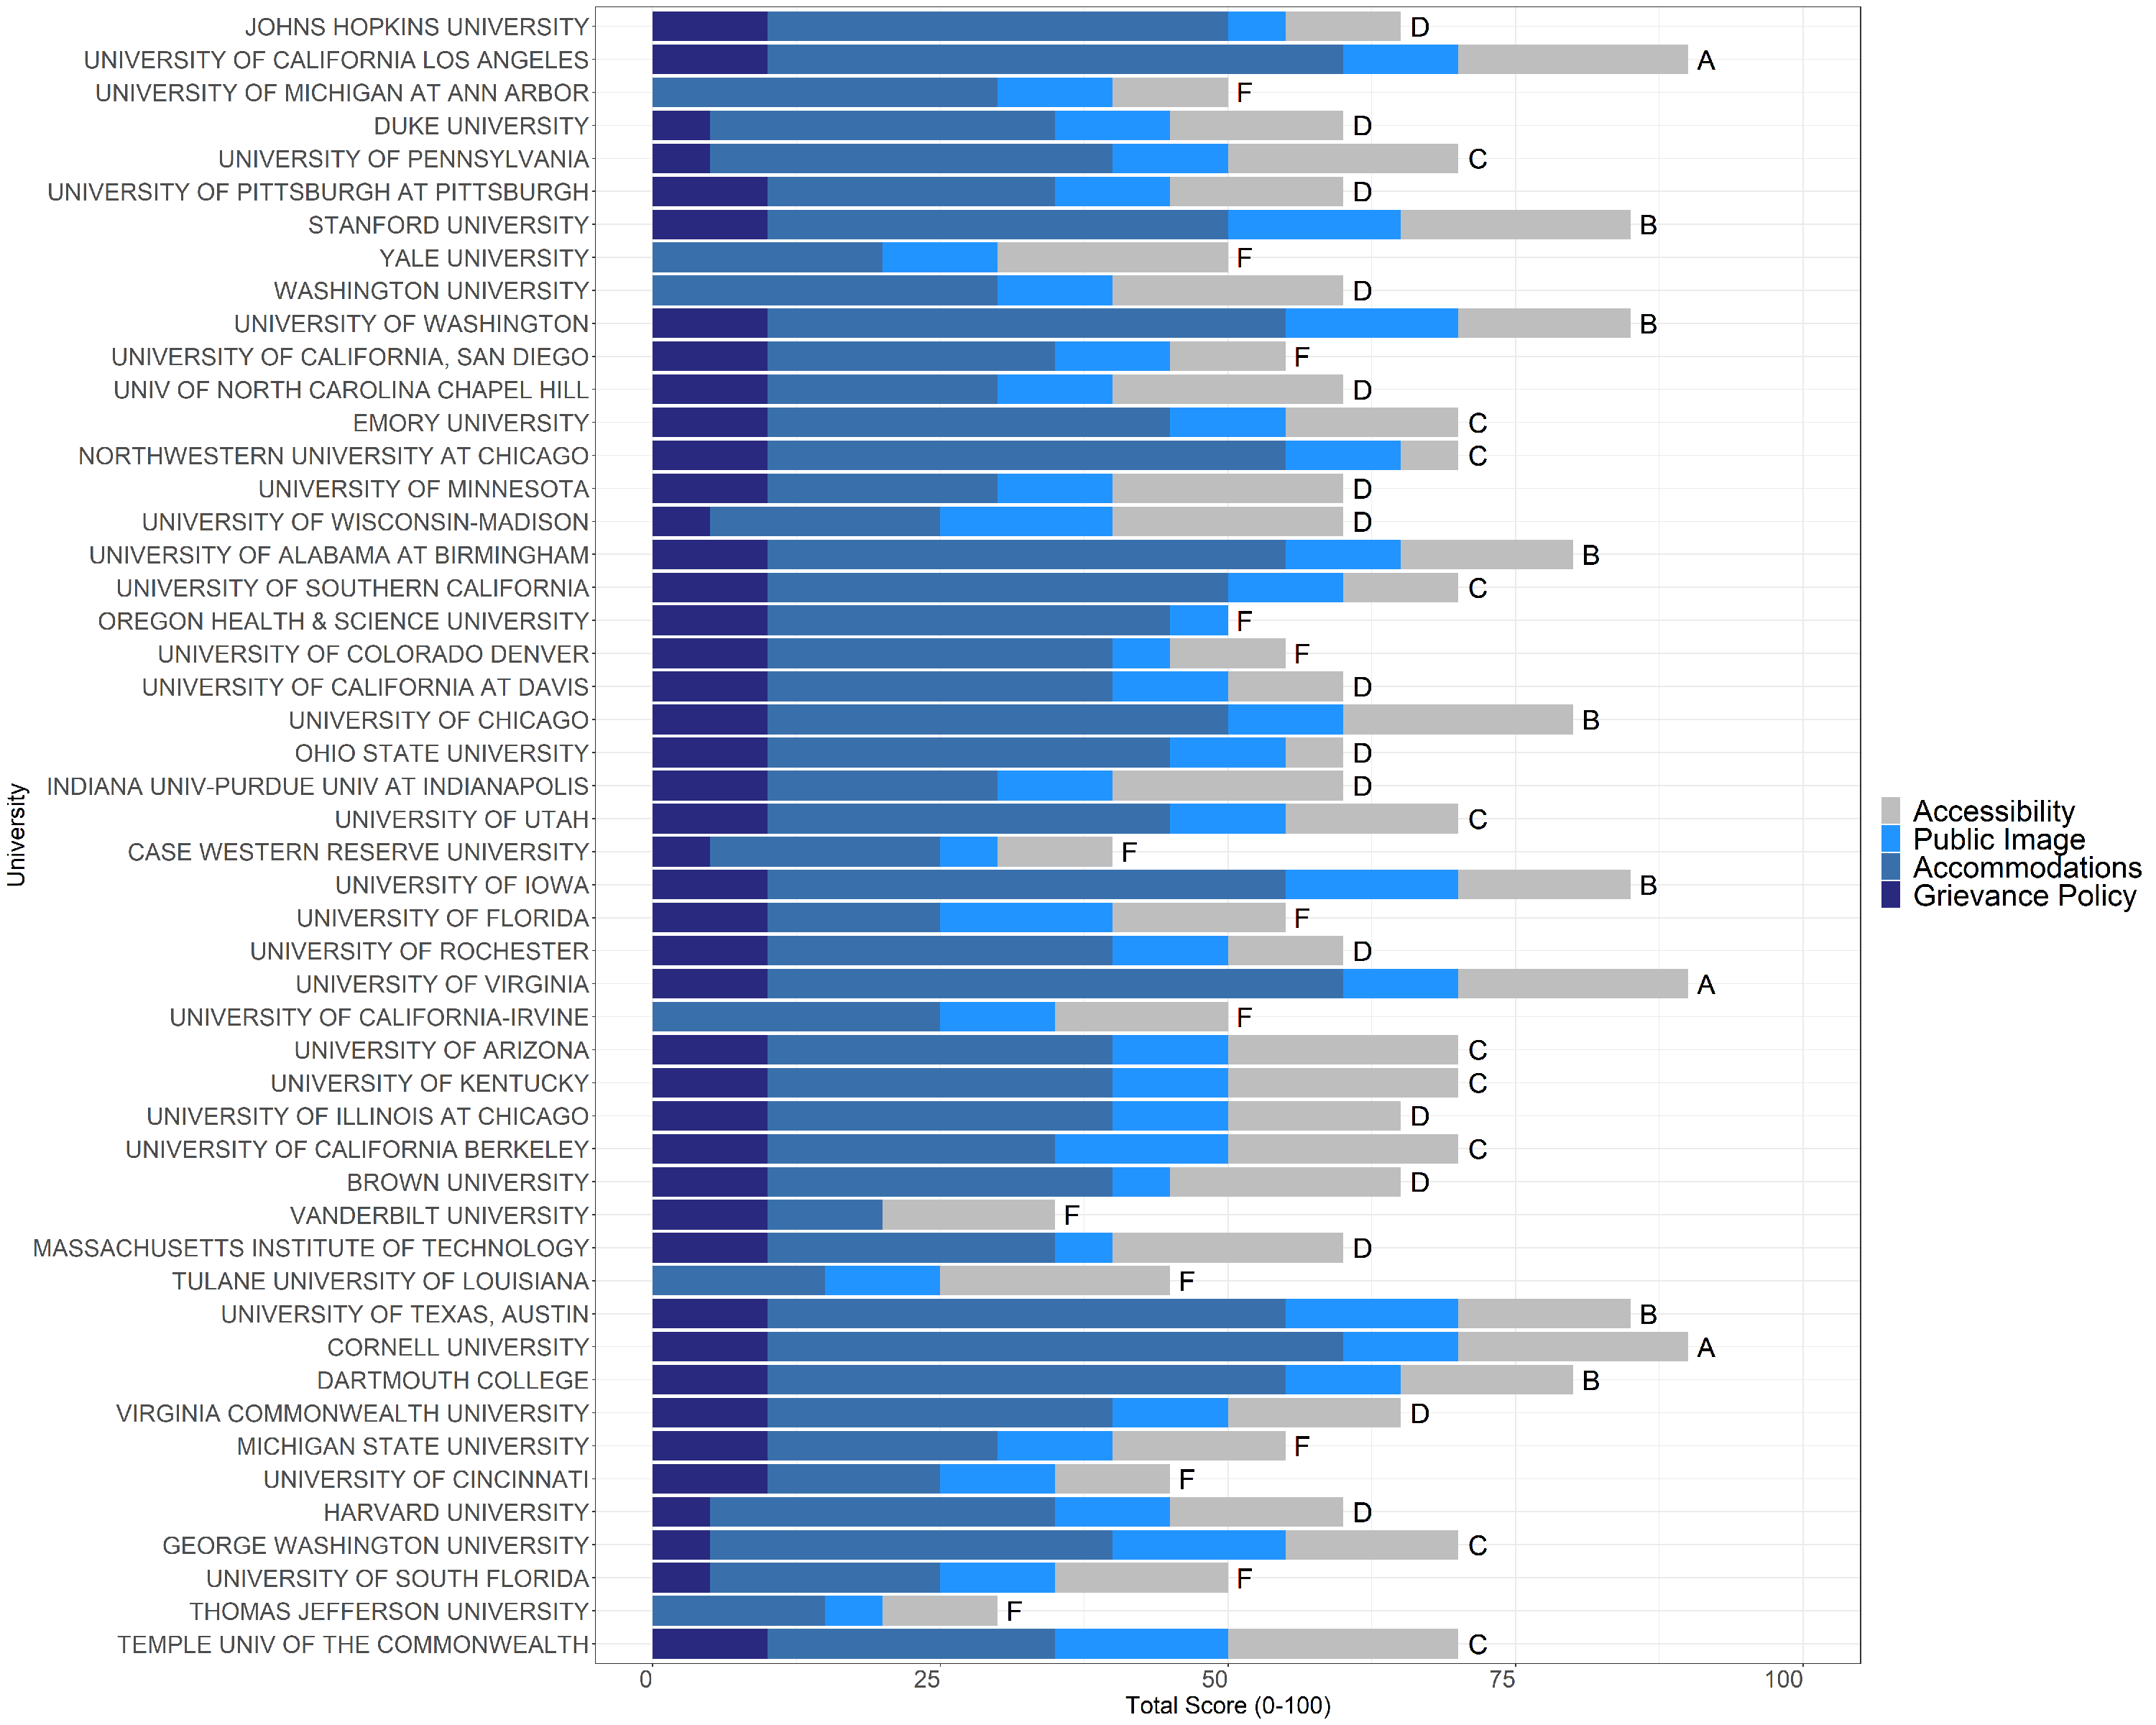 Stacked bar graph of disability inclusion scores for the top 25 undergraduate universities based on National Institutes of Health funding. Data is in Table 1.